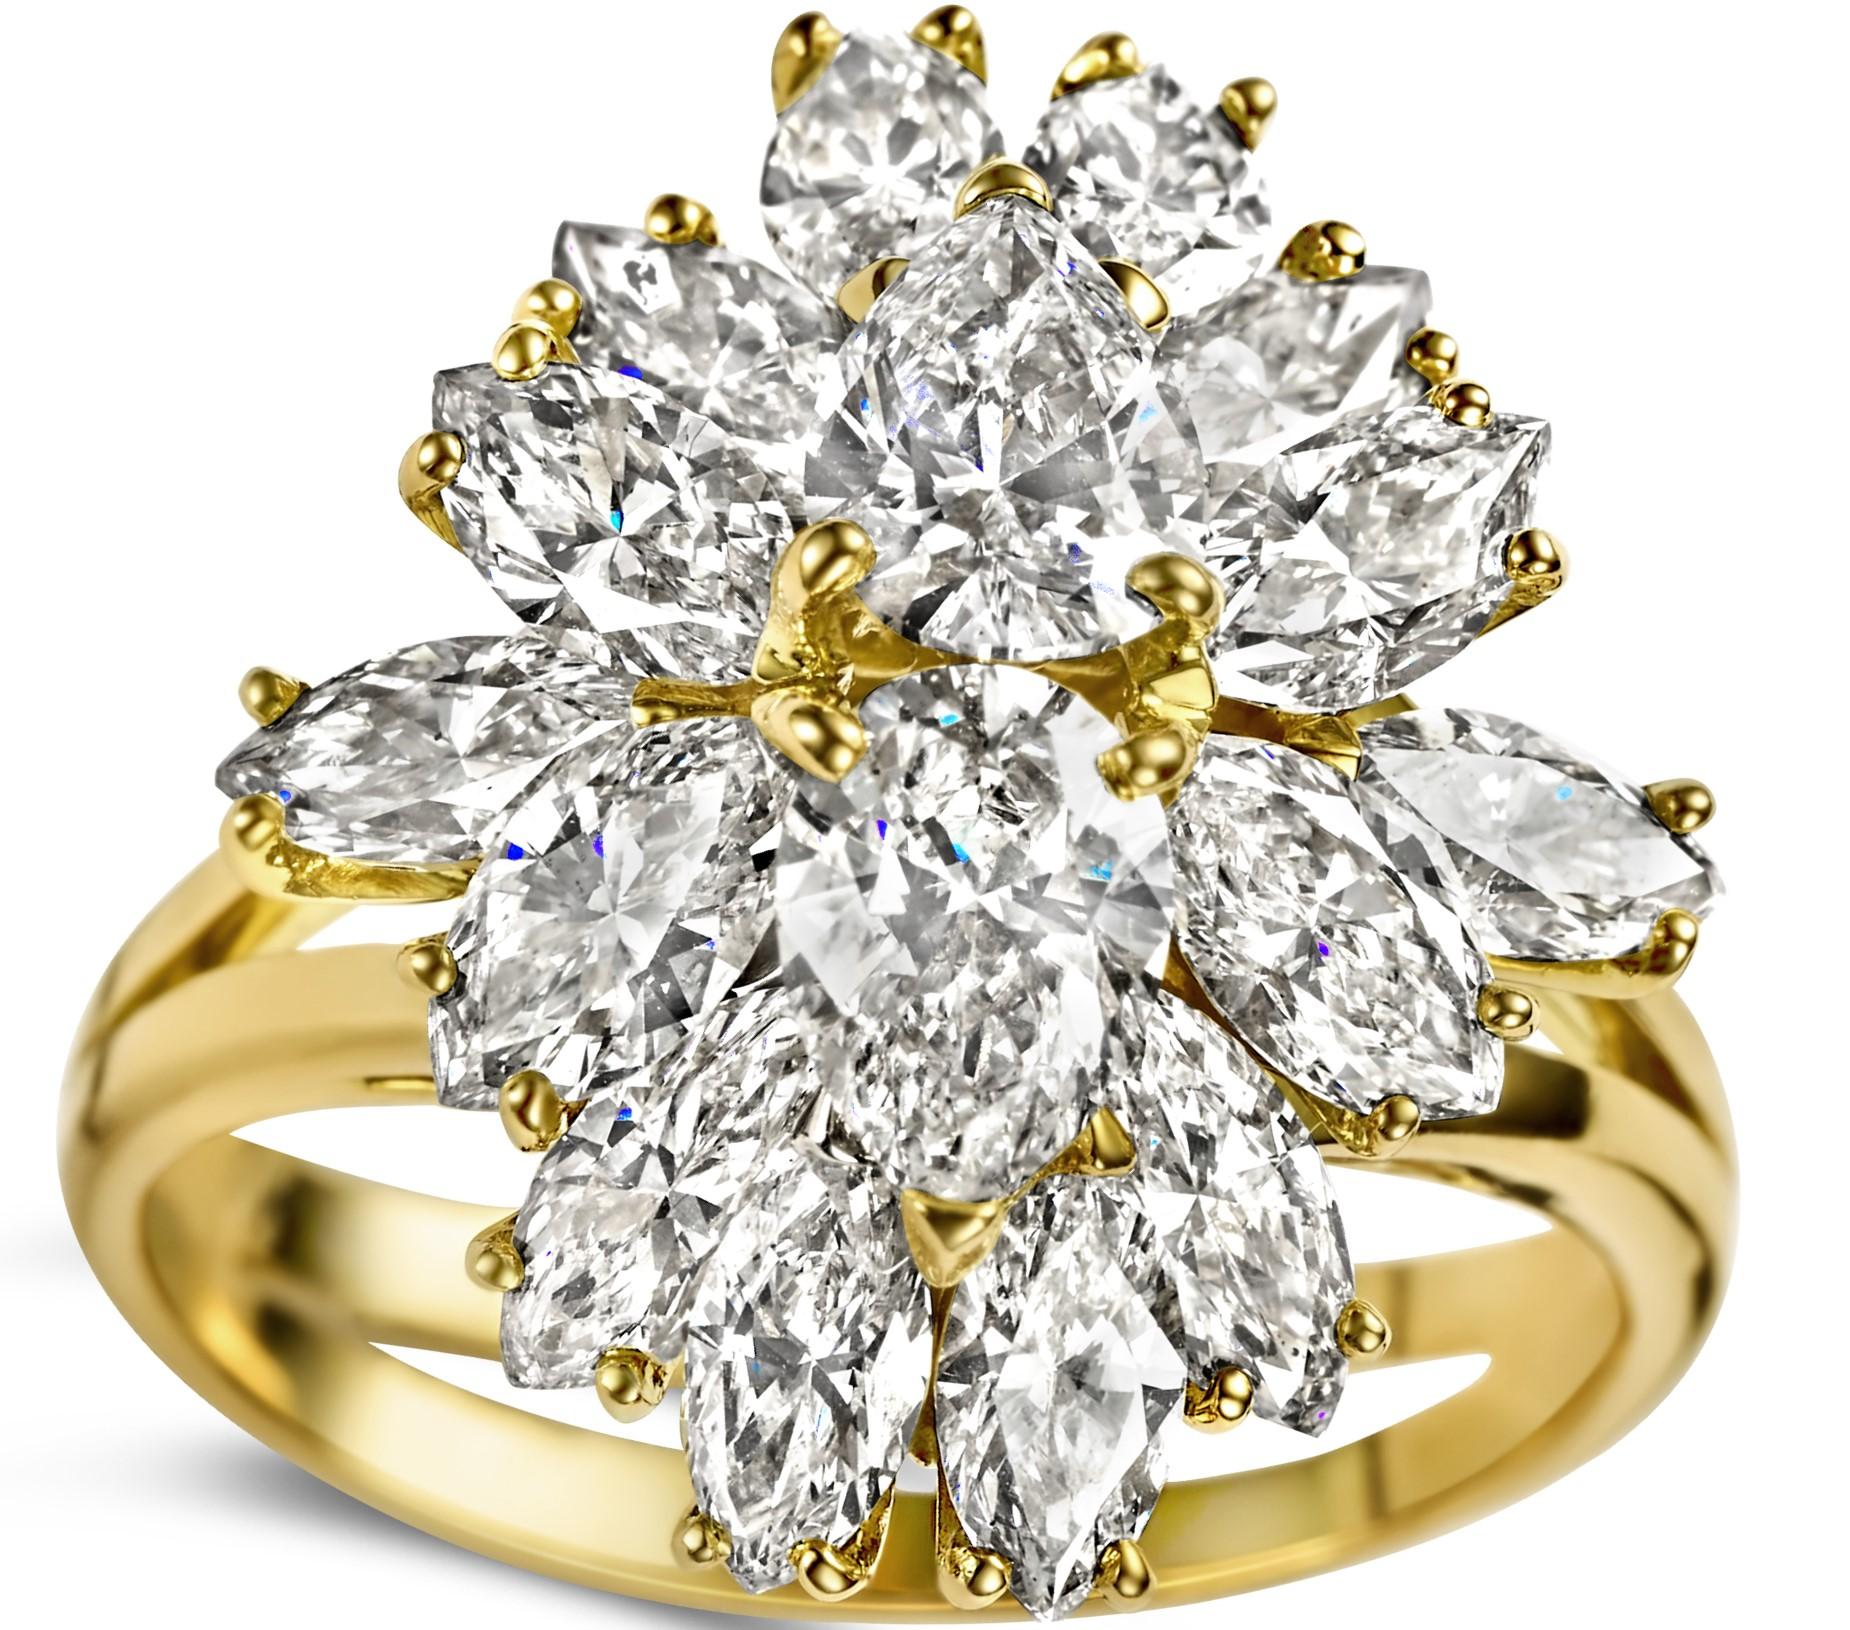 Beautiful Asprey London 18kt. Yellow Gold Ring With 1.2 ct. Pear Cut and 2.03 kt. Marquise Cut Diamonds, from Estate Sultan of Oman Qaboos Bin Said.

Diamonds : 
Pear Cut : approx. 1.2 ct.
Marquise Cut : approx. 2.03ct.

Material : 18kt 

Ringsize :